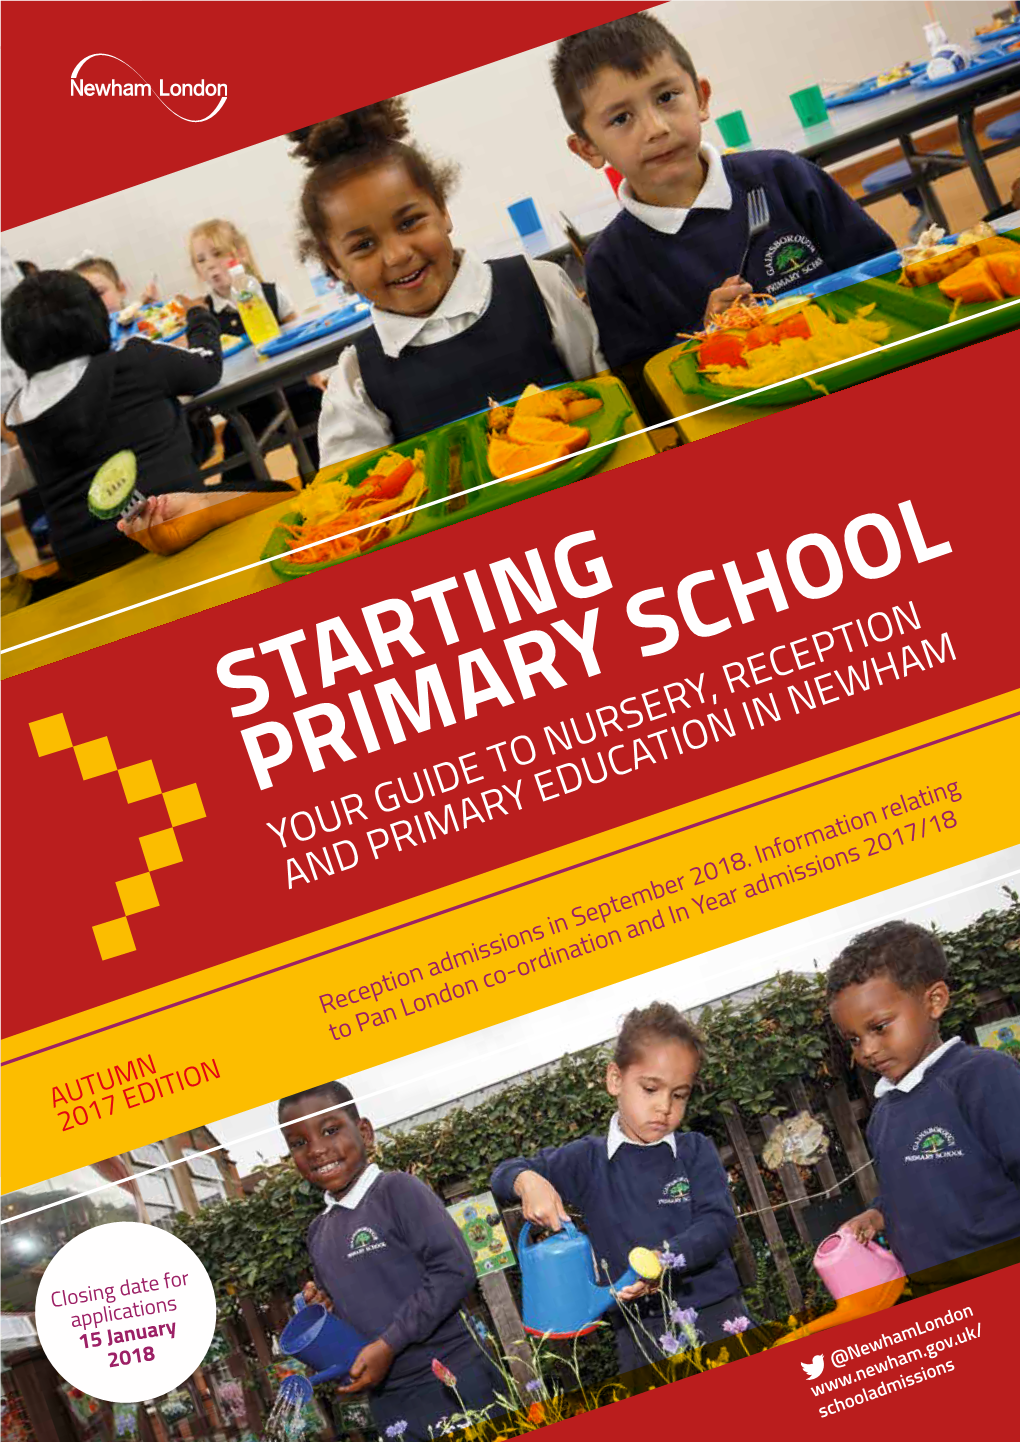 Starting Primary School Your Guide to Nursery, Reception and Primary Education in Newham